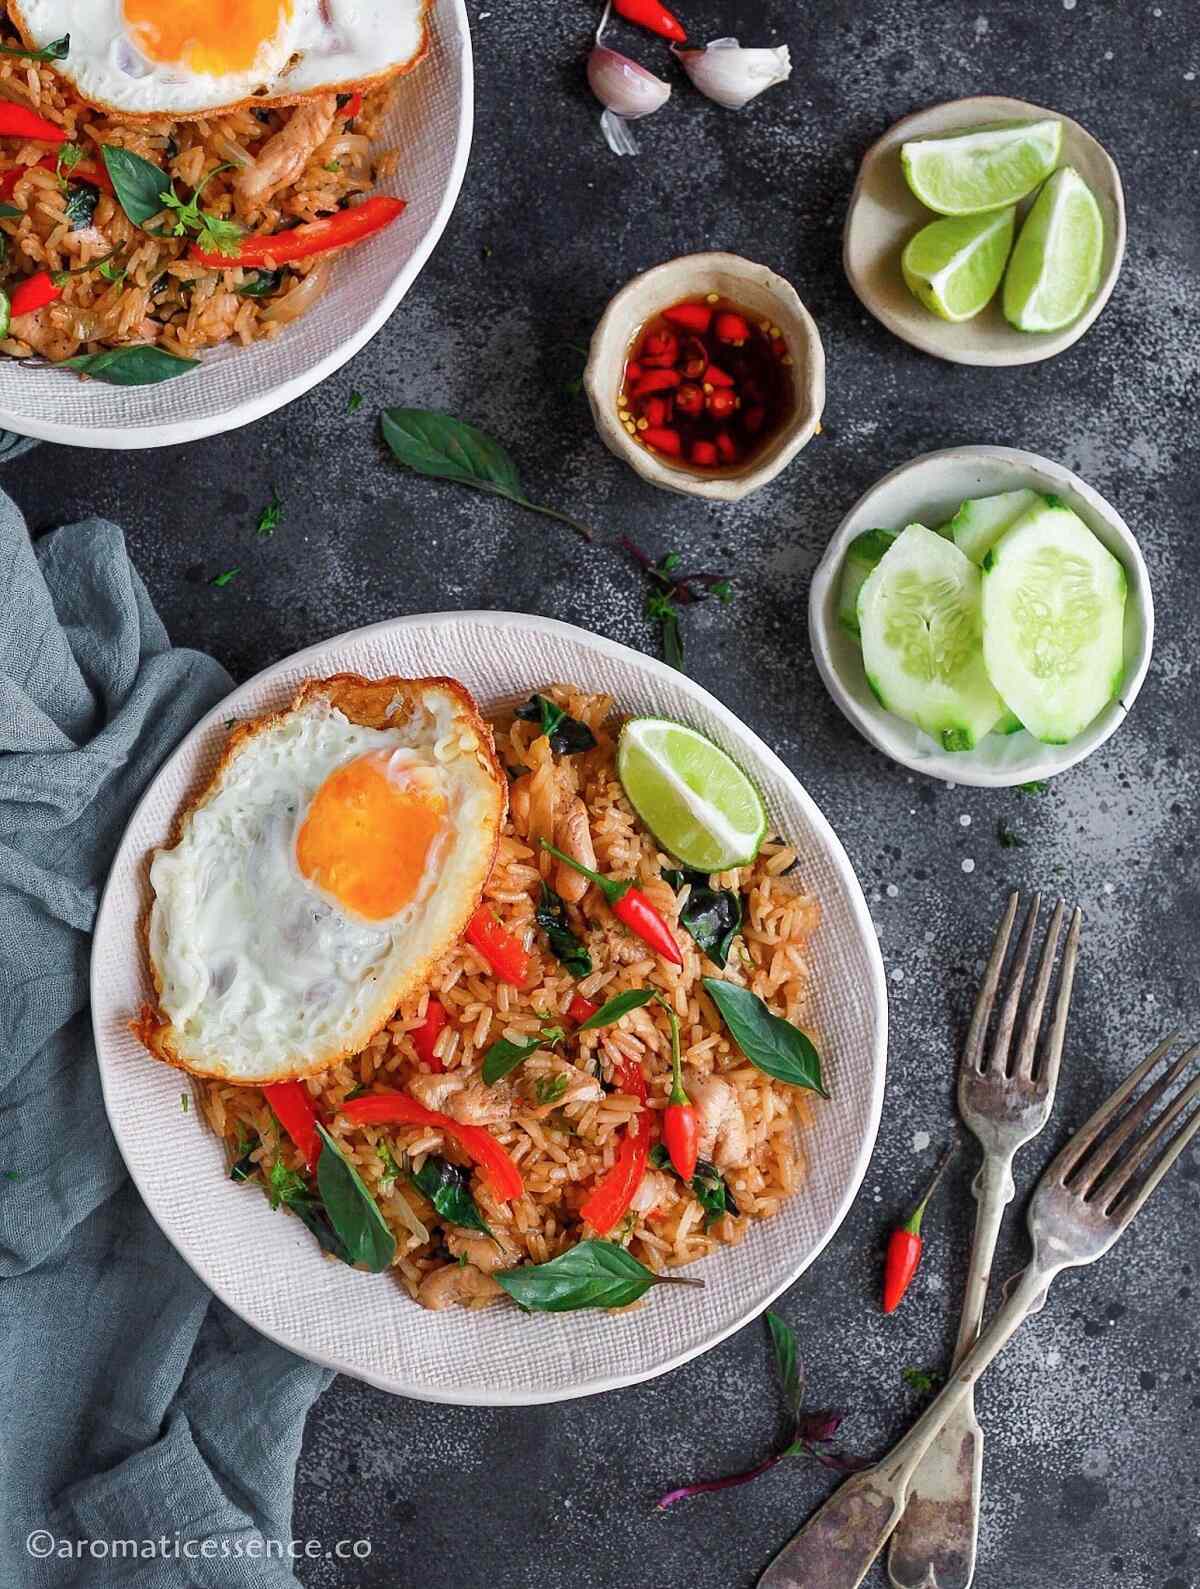 Thai basil fried rice with chicken served in two shallow ceramic white bowls against a dark background